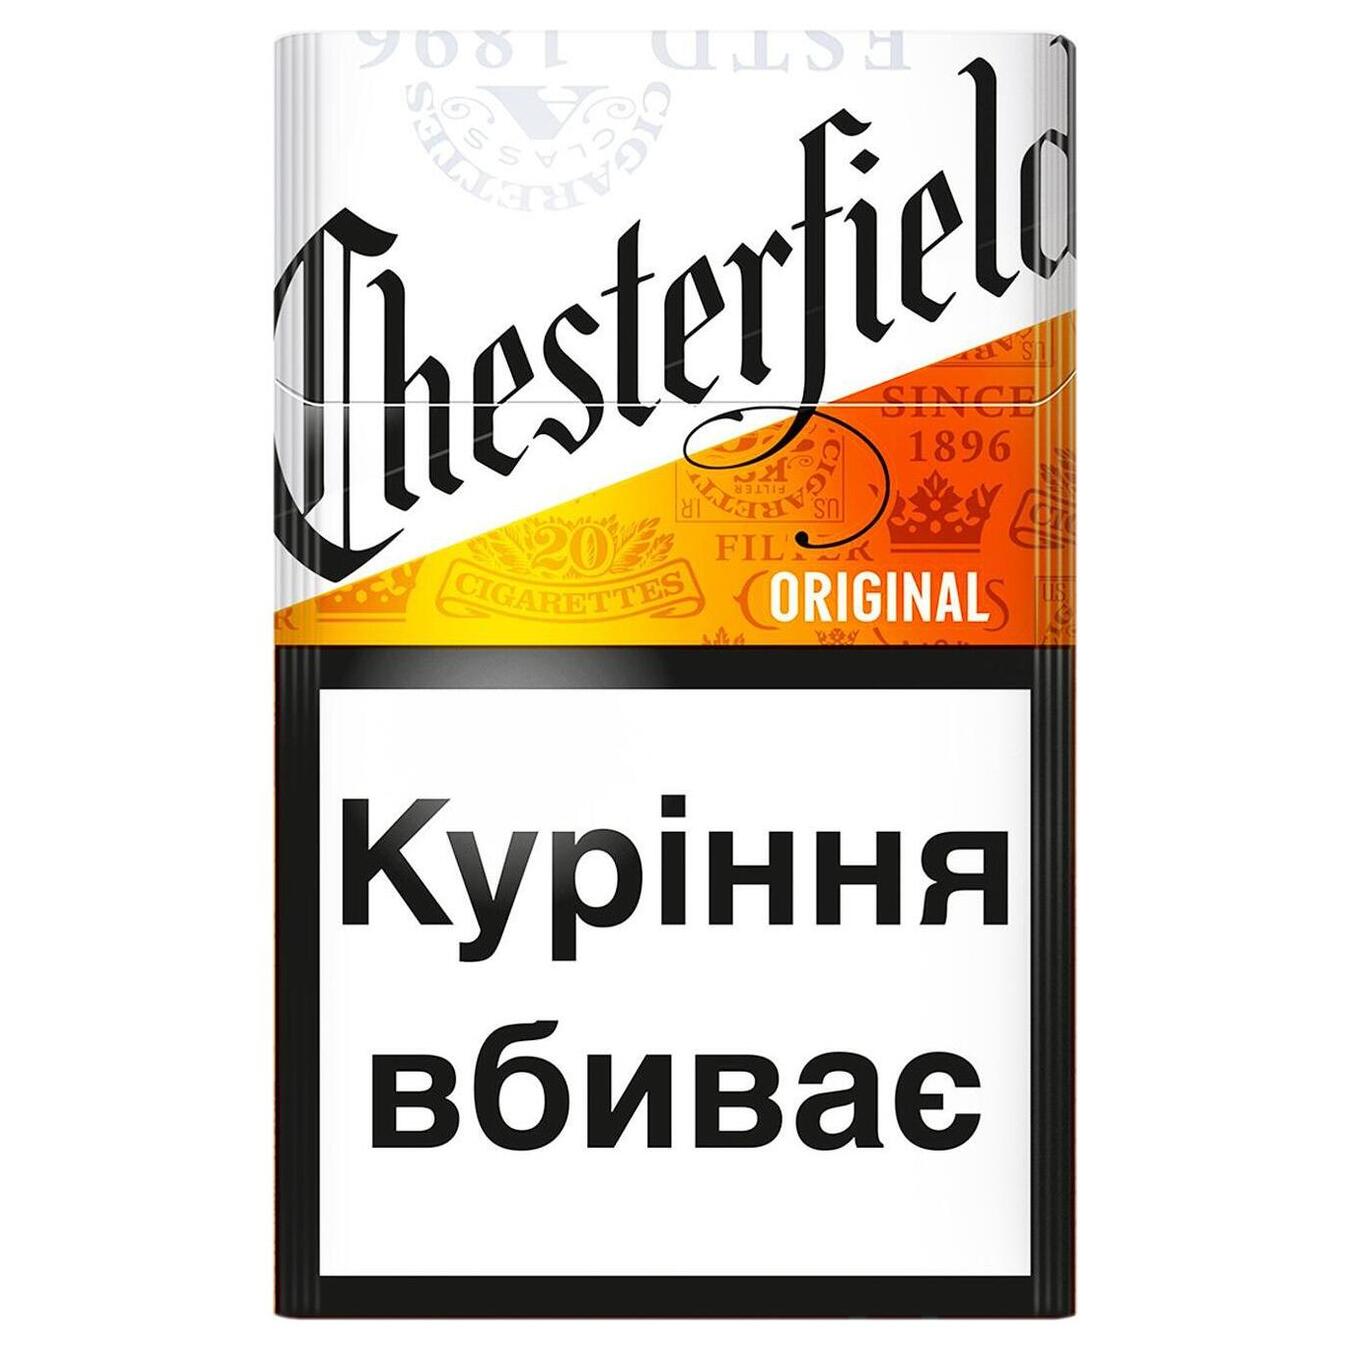 Chesterfield Original cigarettes 20 pcs (the price is indicated without excise tax)